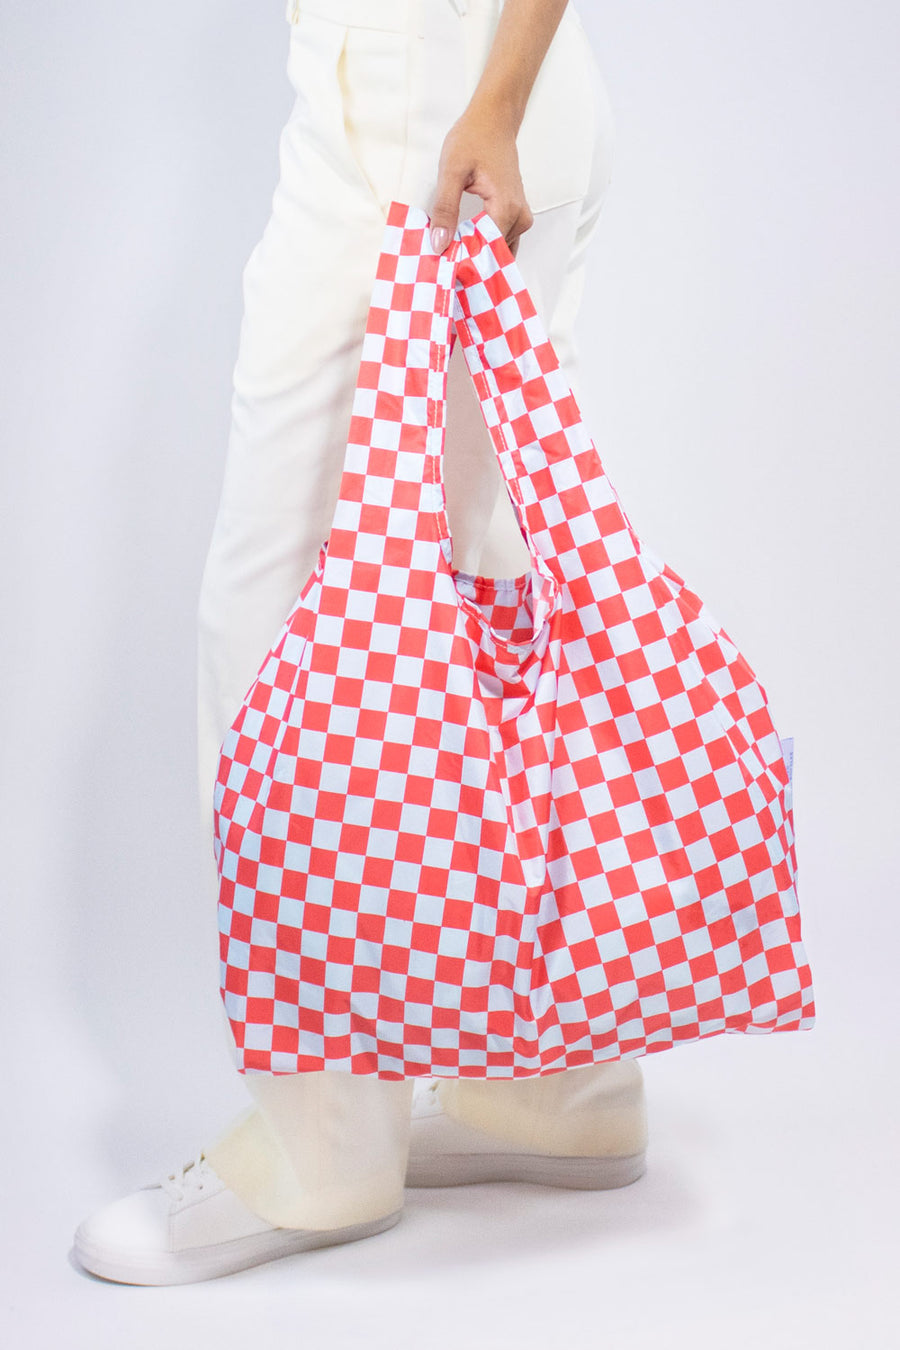 Kind Bag Checkerboard Red Blue Medium Reusable Bag Front View